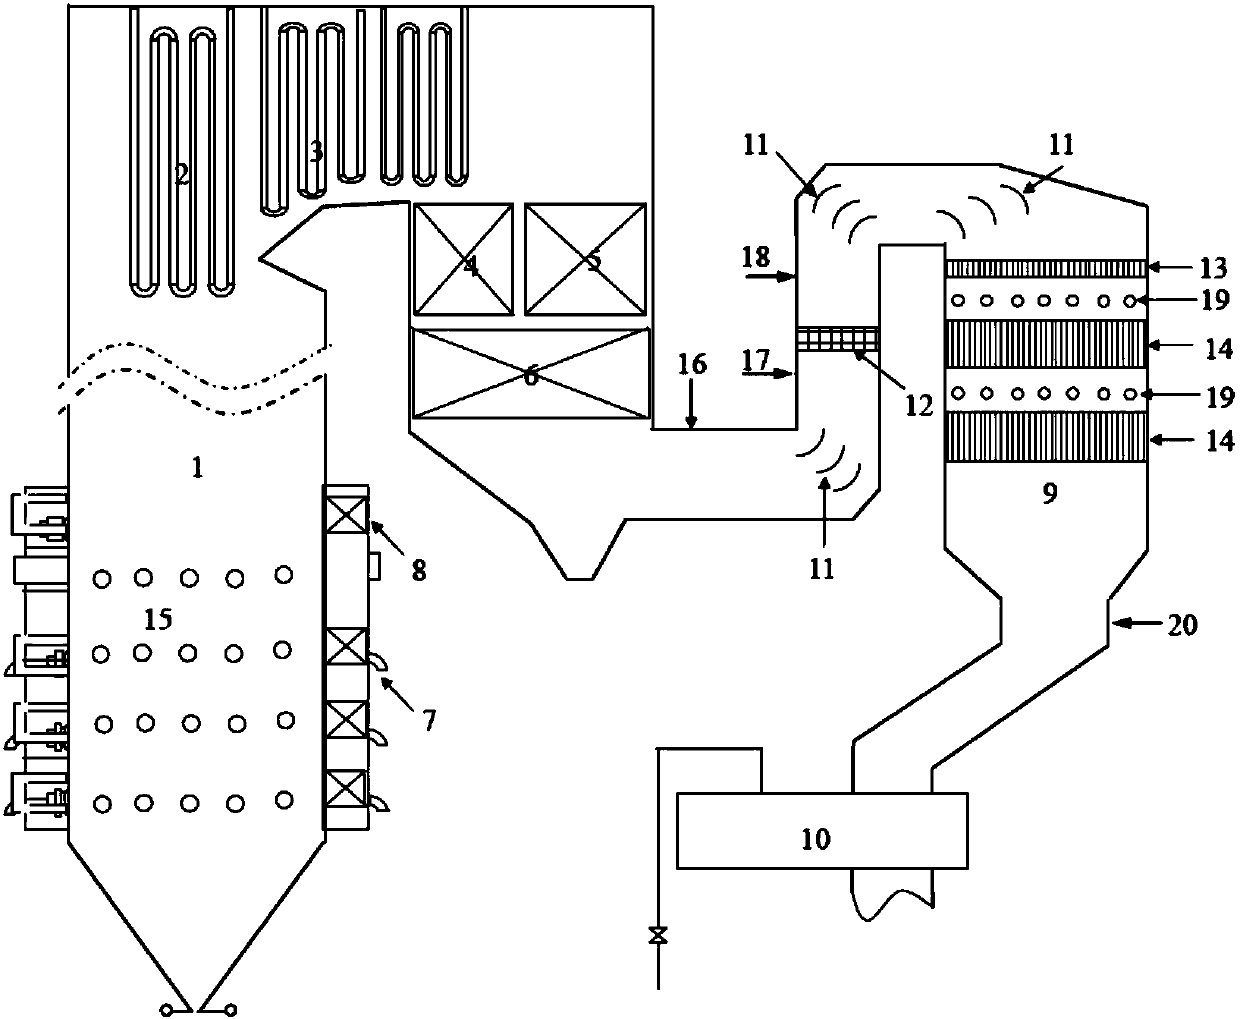 Collaborative optimization method for coal-fired power plant boiler system and denitrification system operation